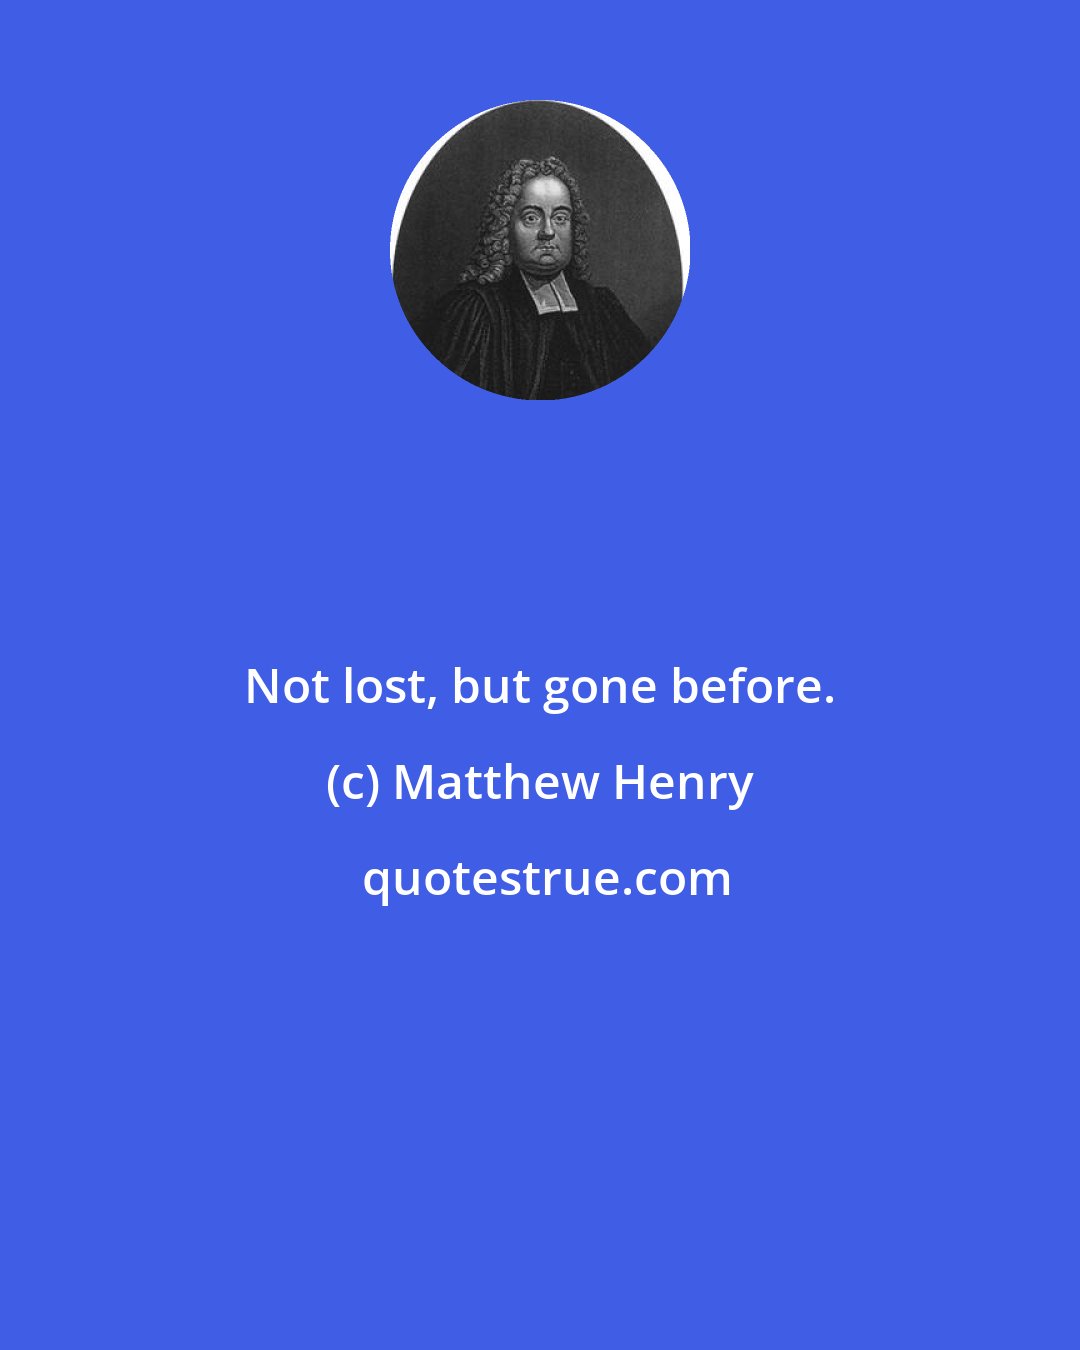 Matthew Henry: Not lost, but gone before.